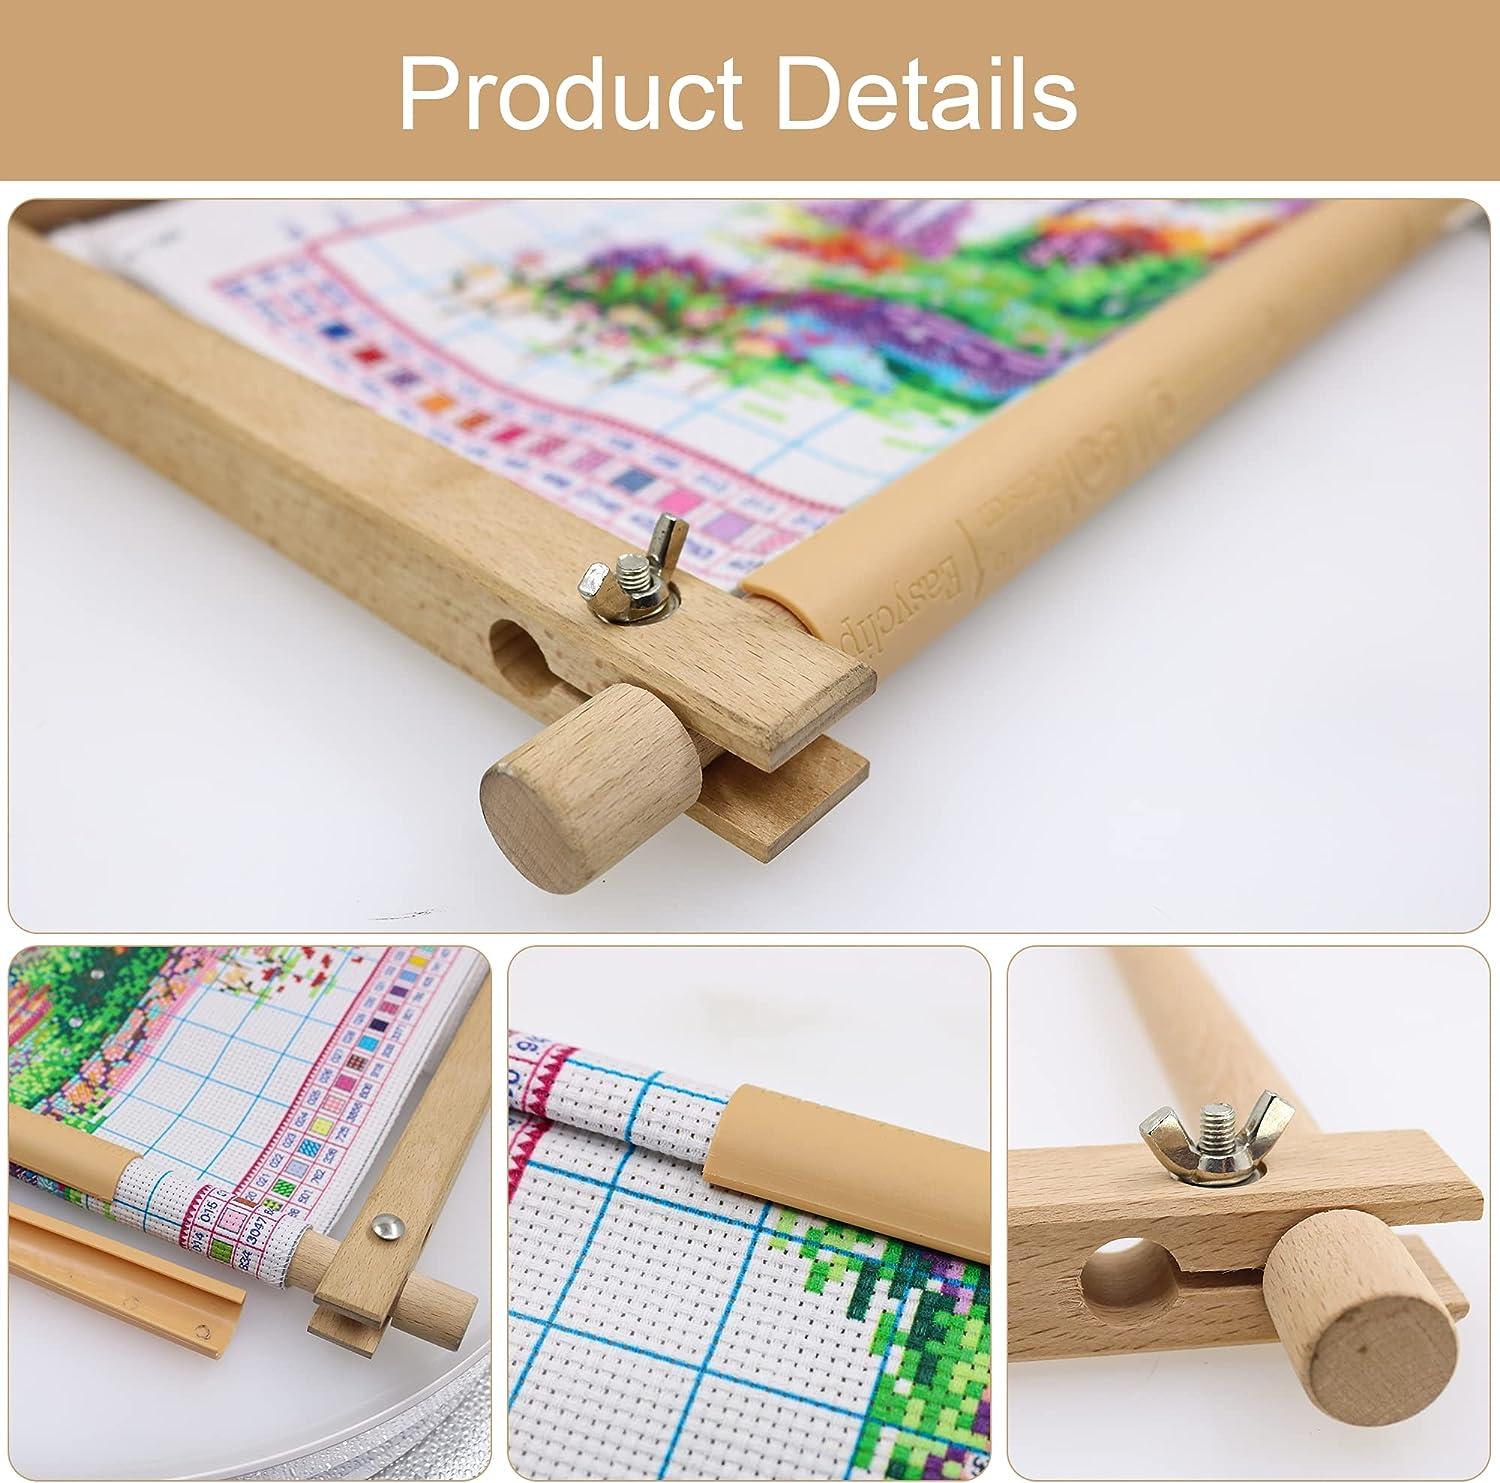 needlepoint stretcher bars products for sale